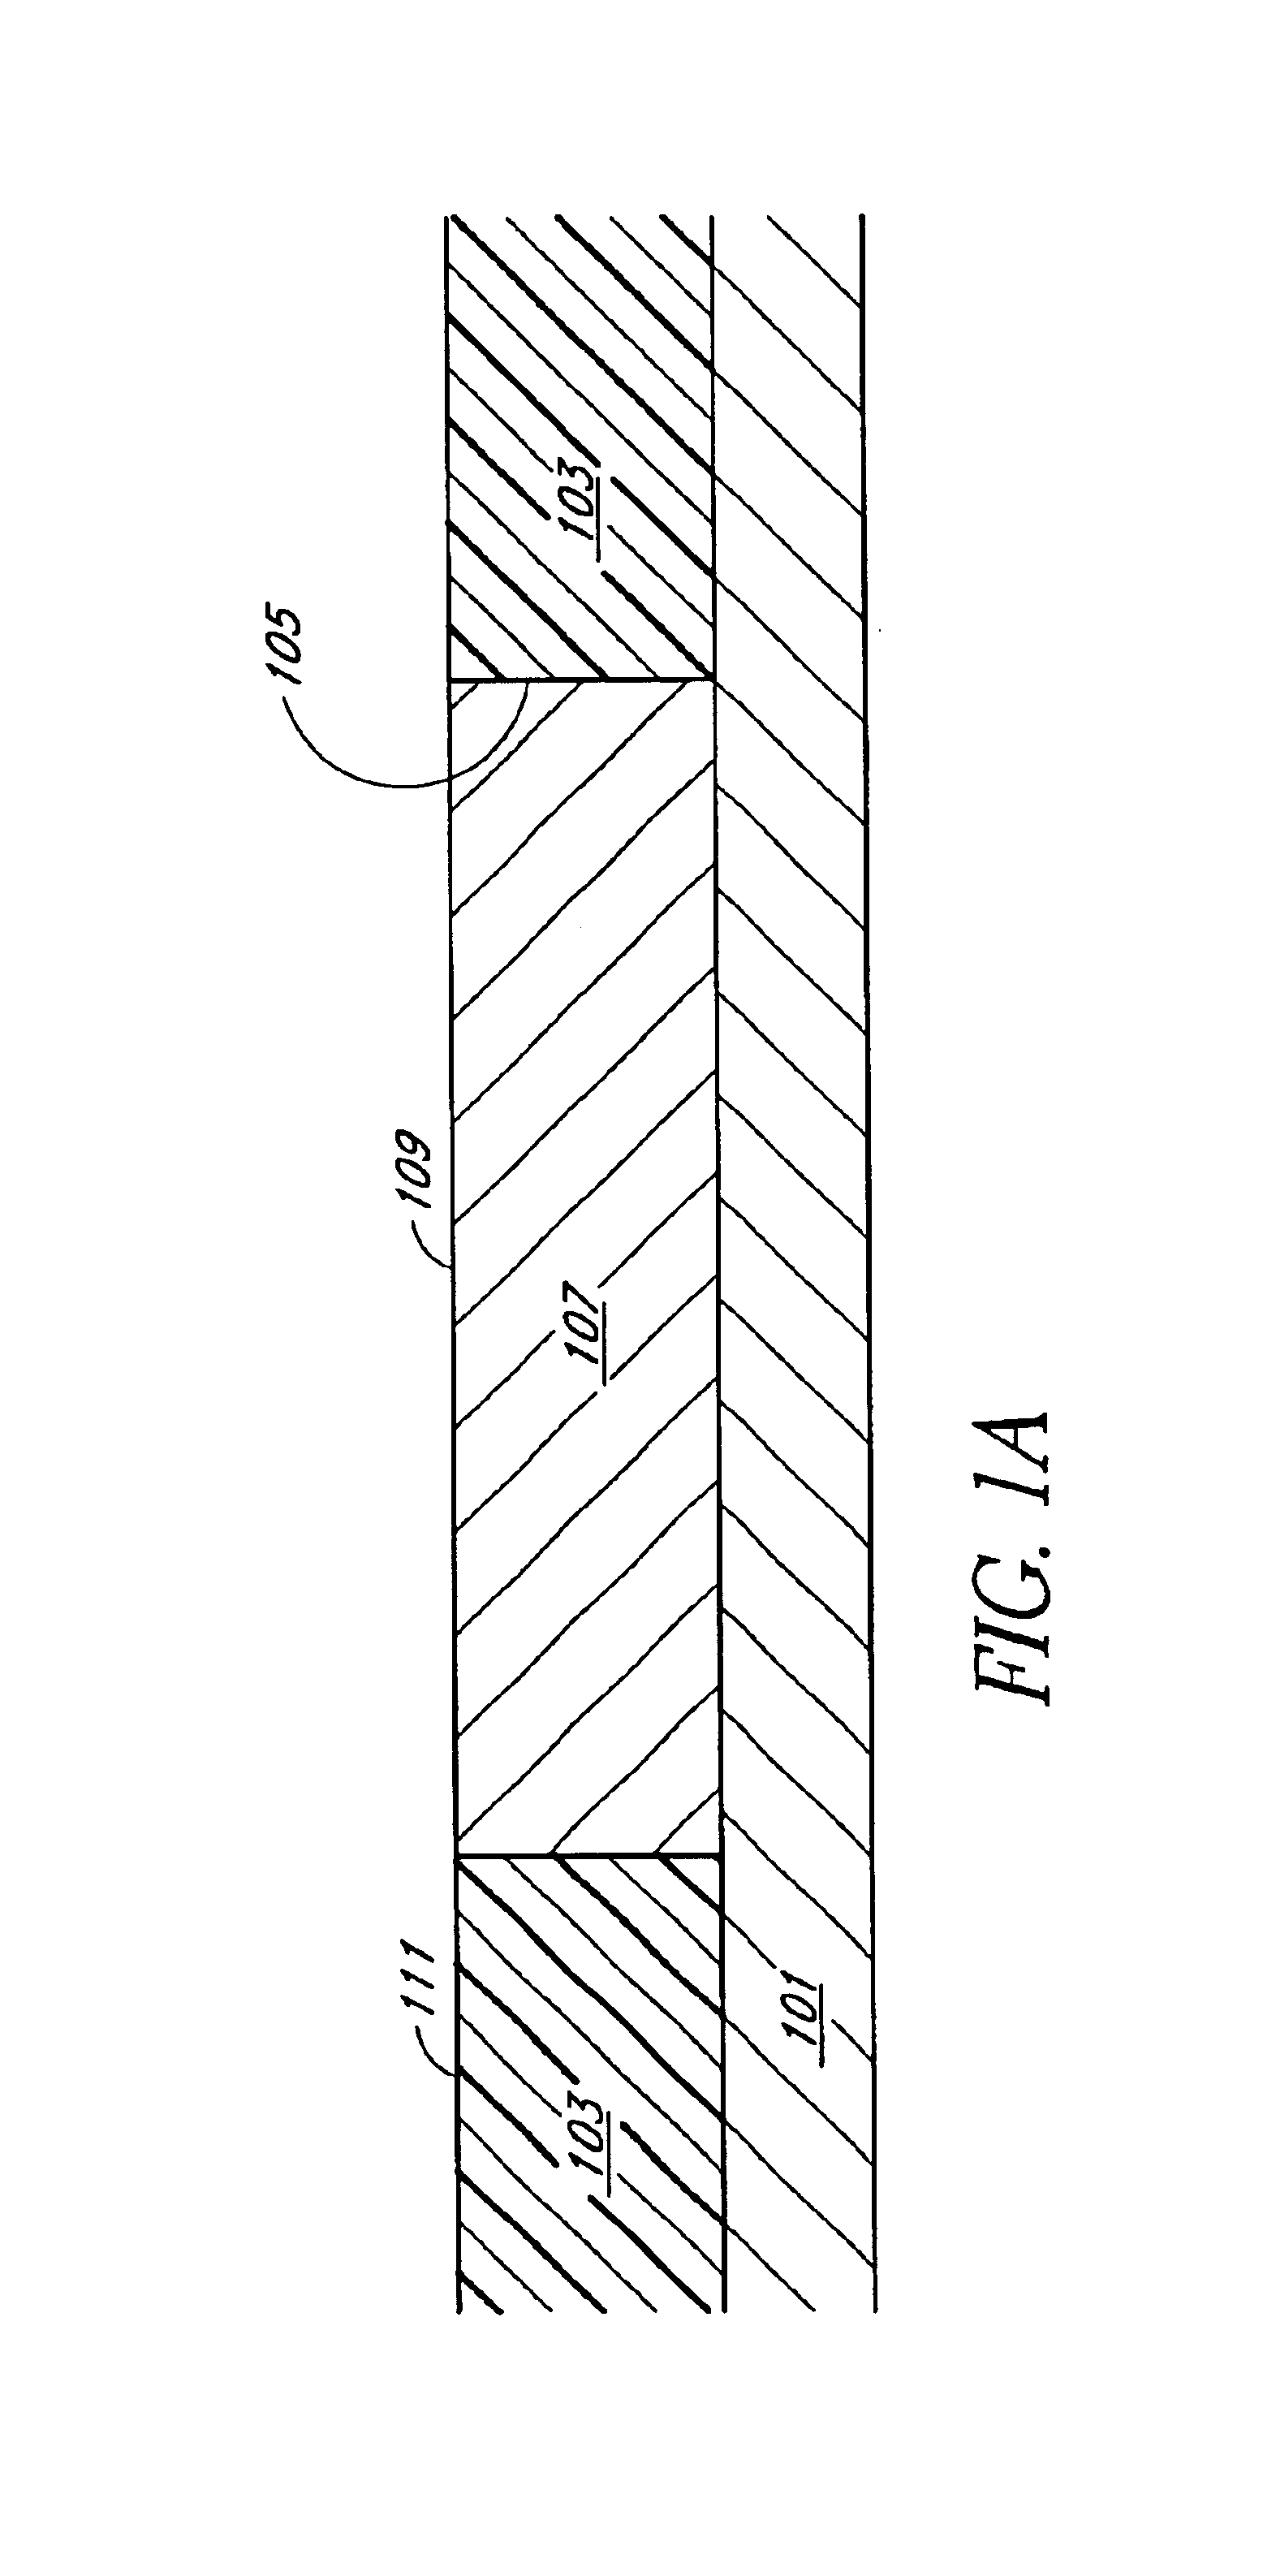 Programmable conductor memory cell structure